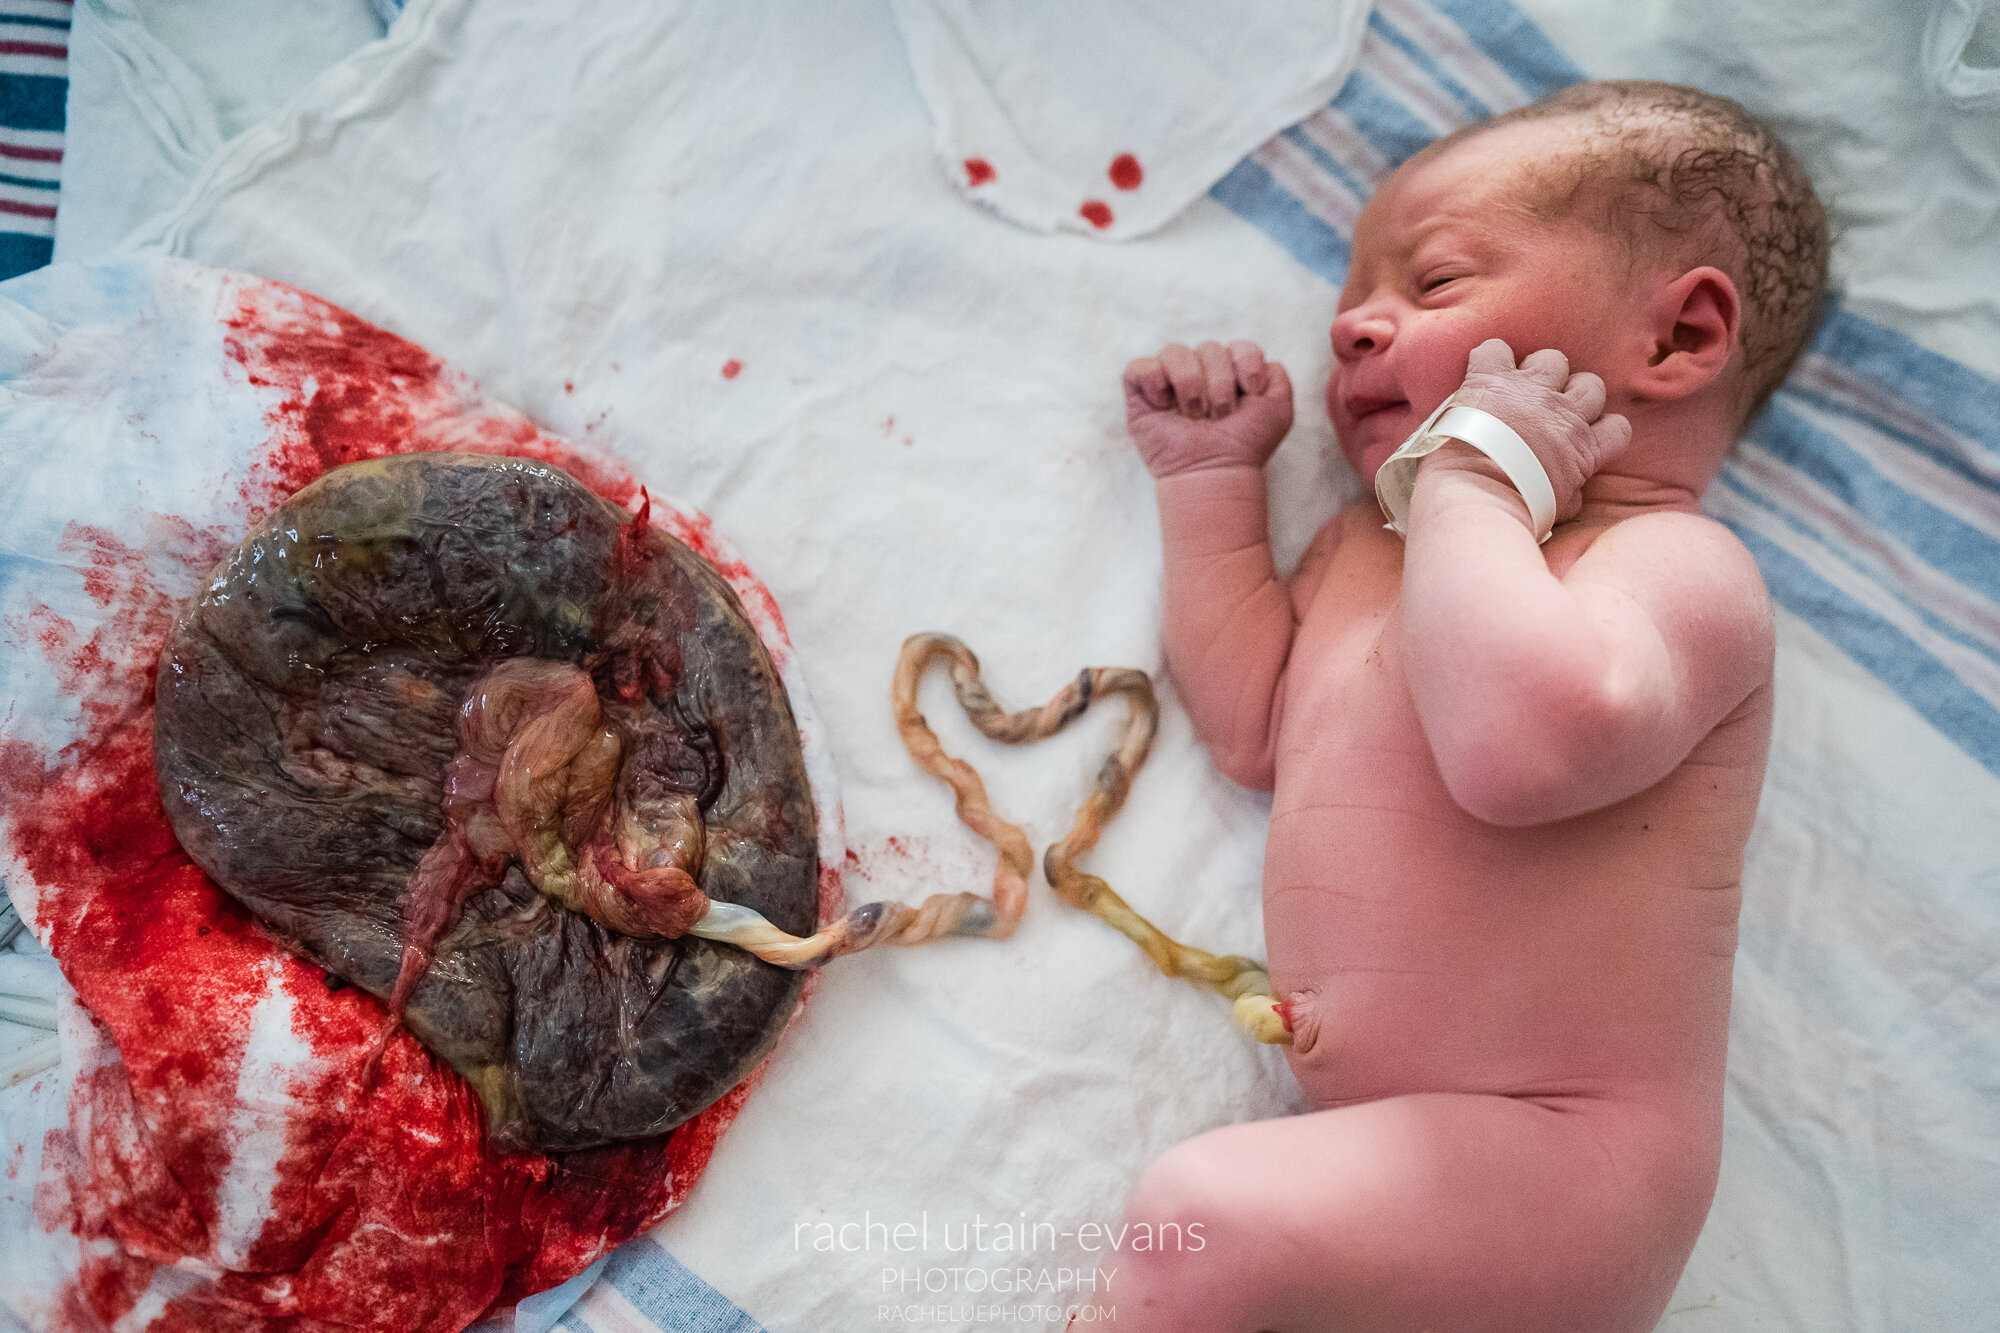 Baby poses next to his placenta with umbilical cord in a heart shape, Philadelphia Birth Photographer